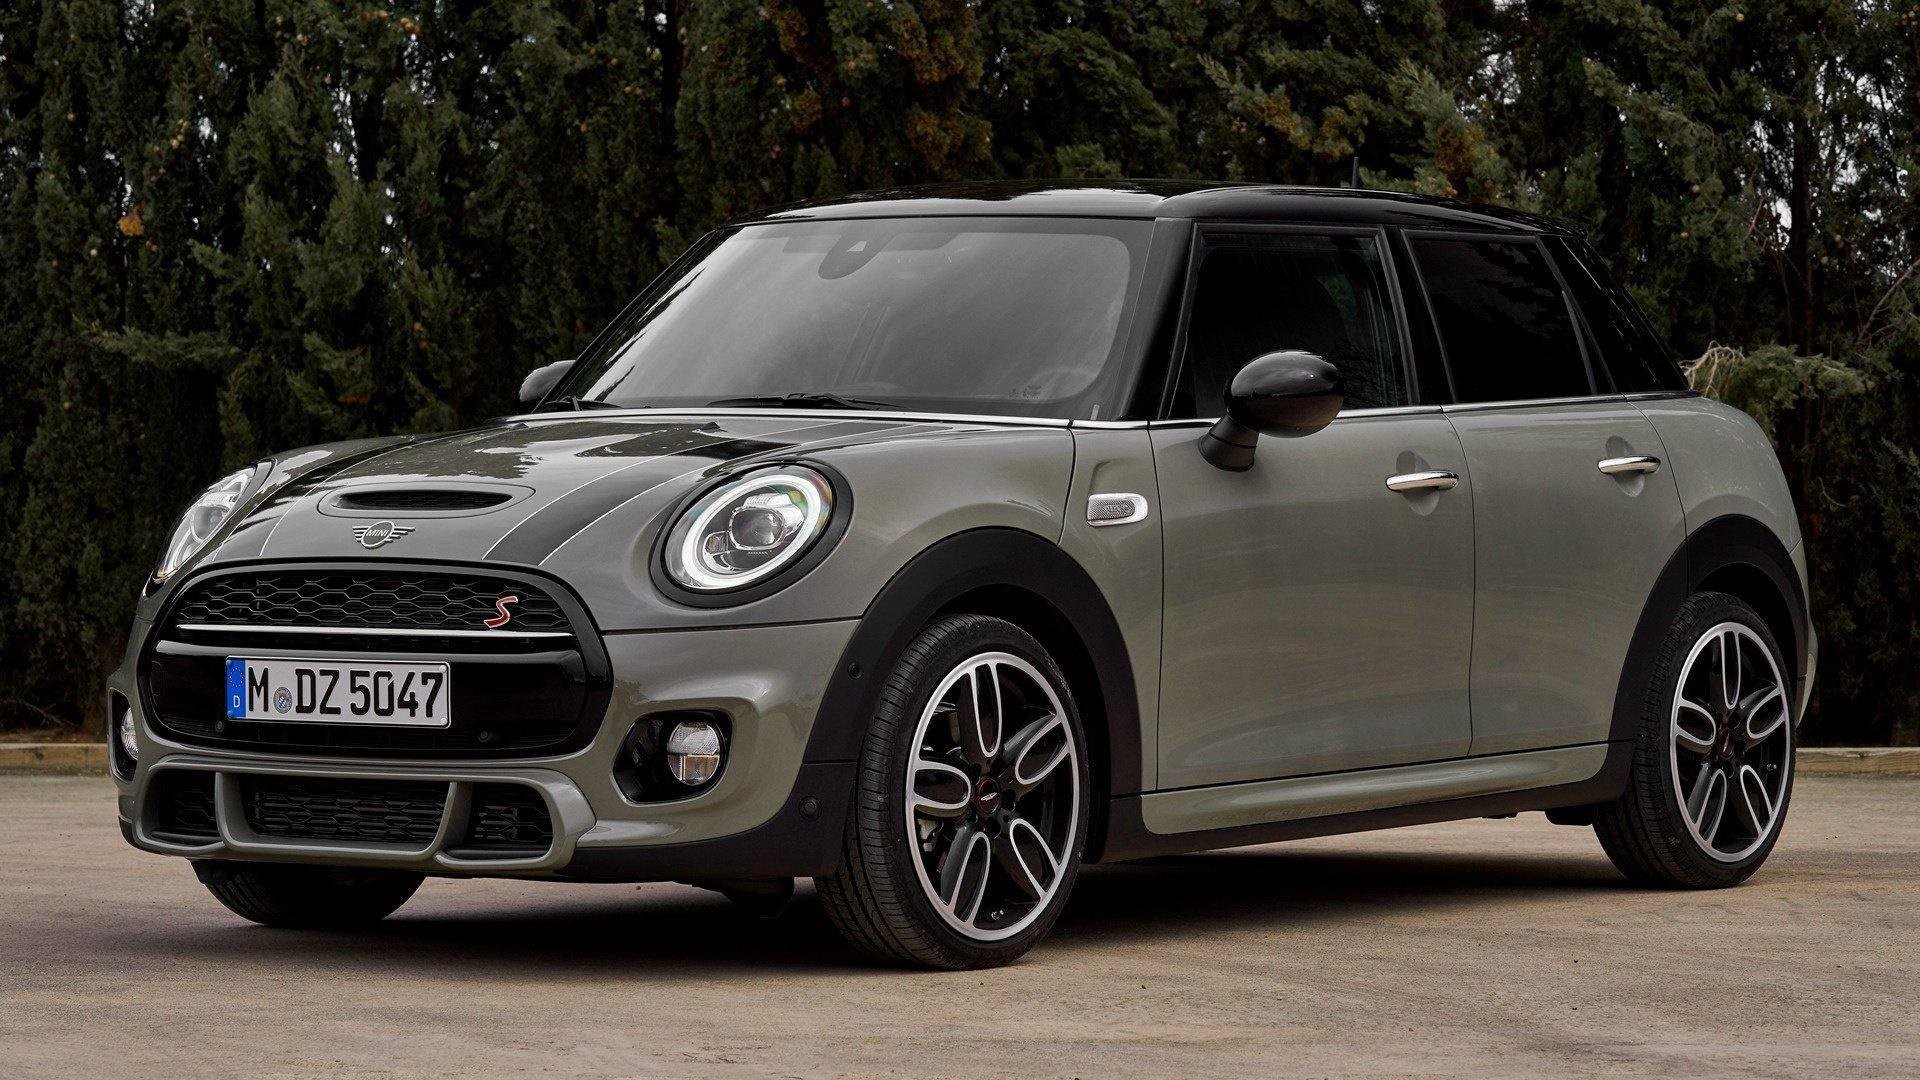 1920x1080  Mini Cooper S JCW Package 5-door Mini wallpaper and High  Definition car images